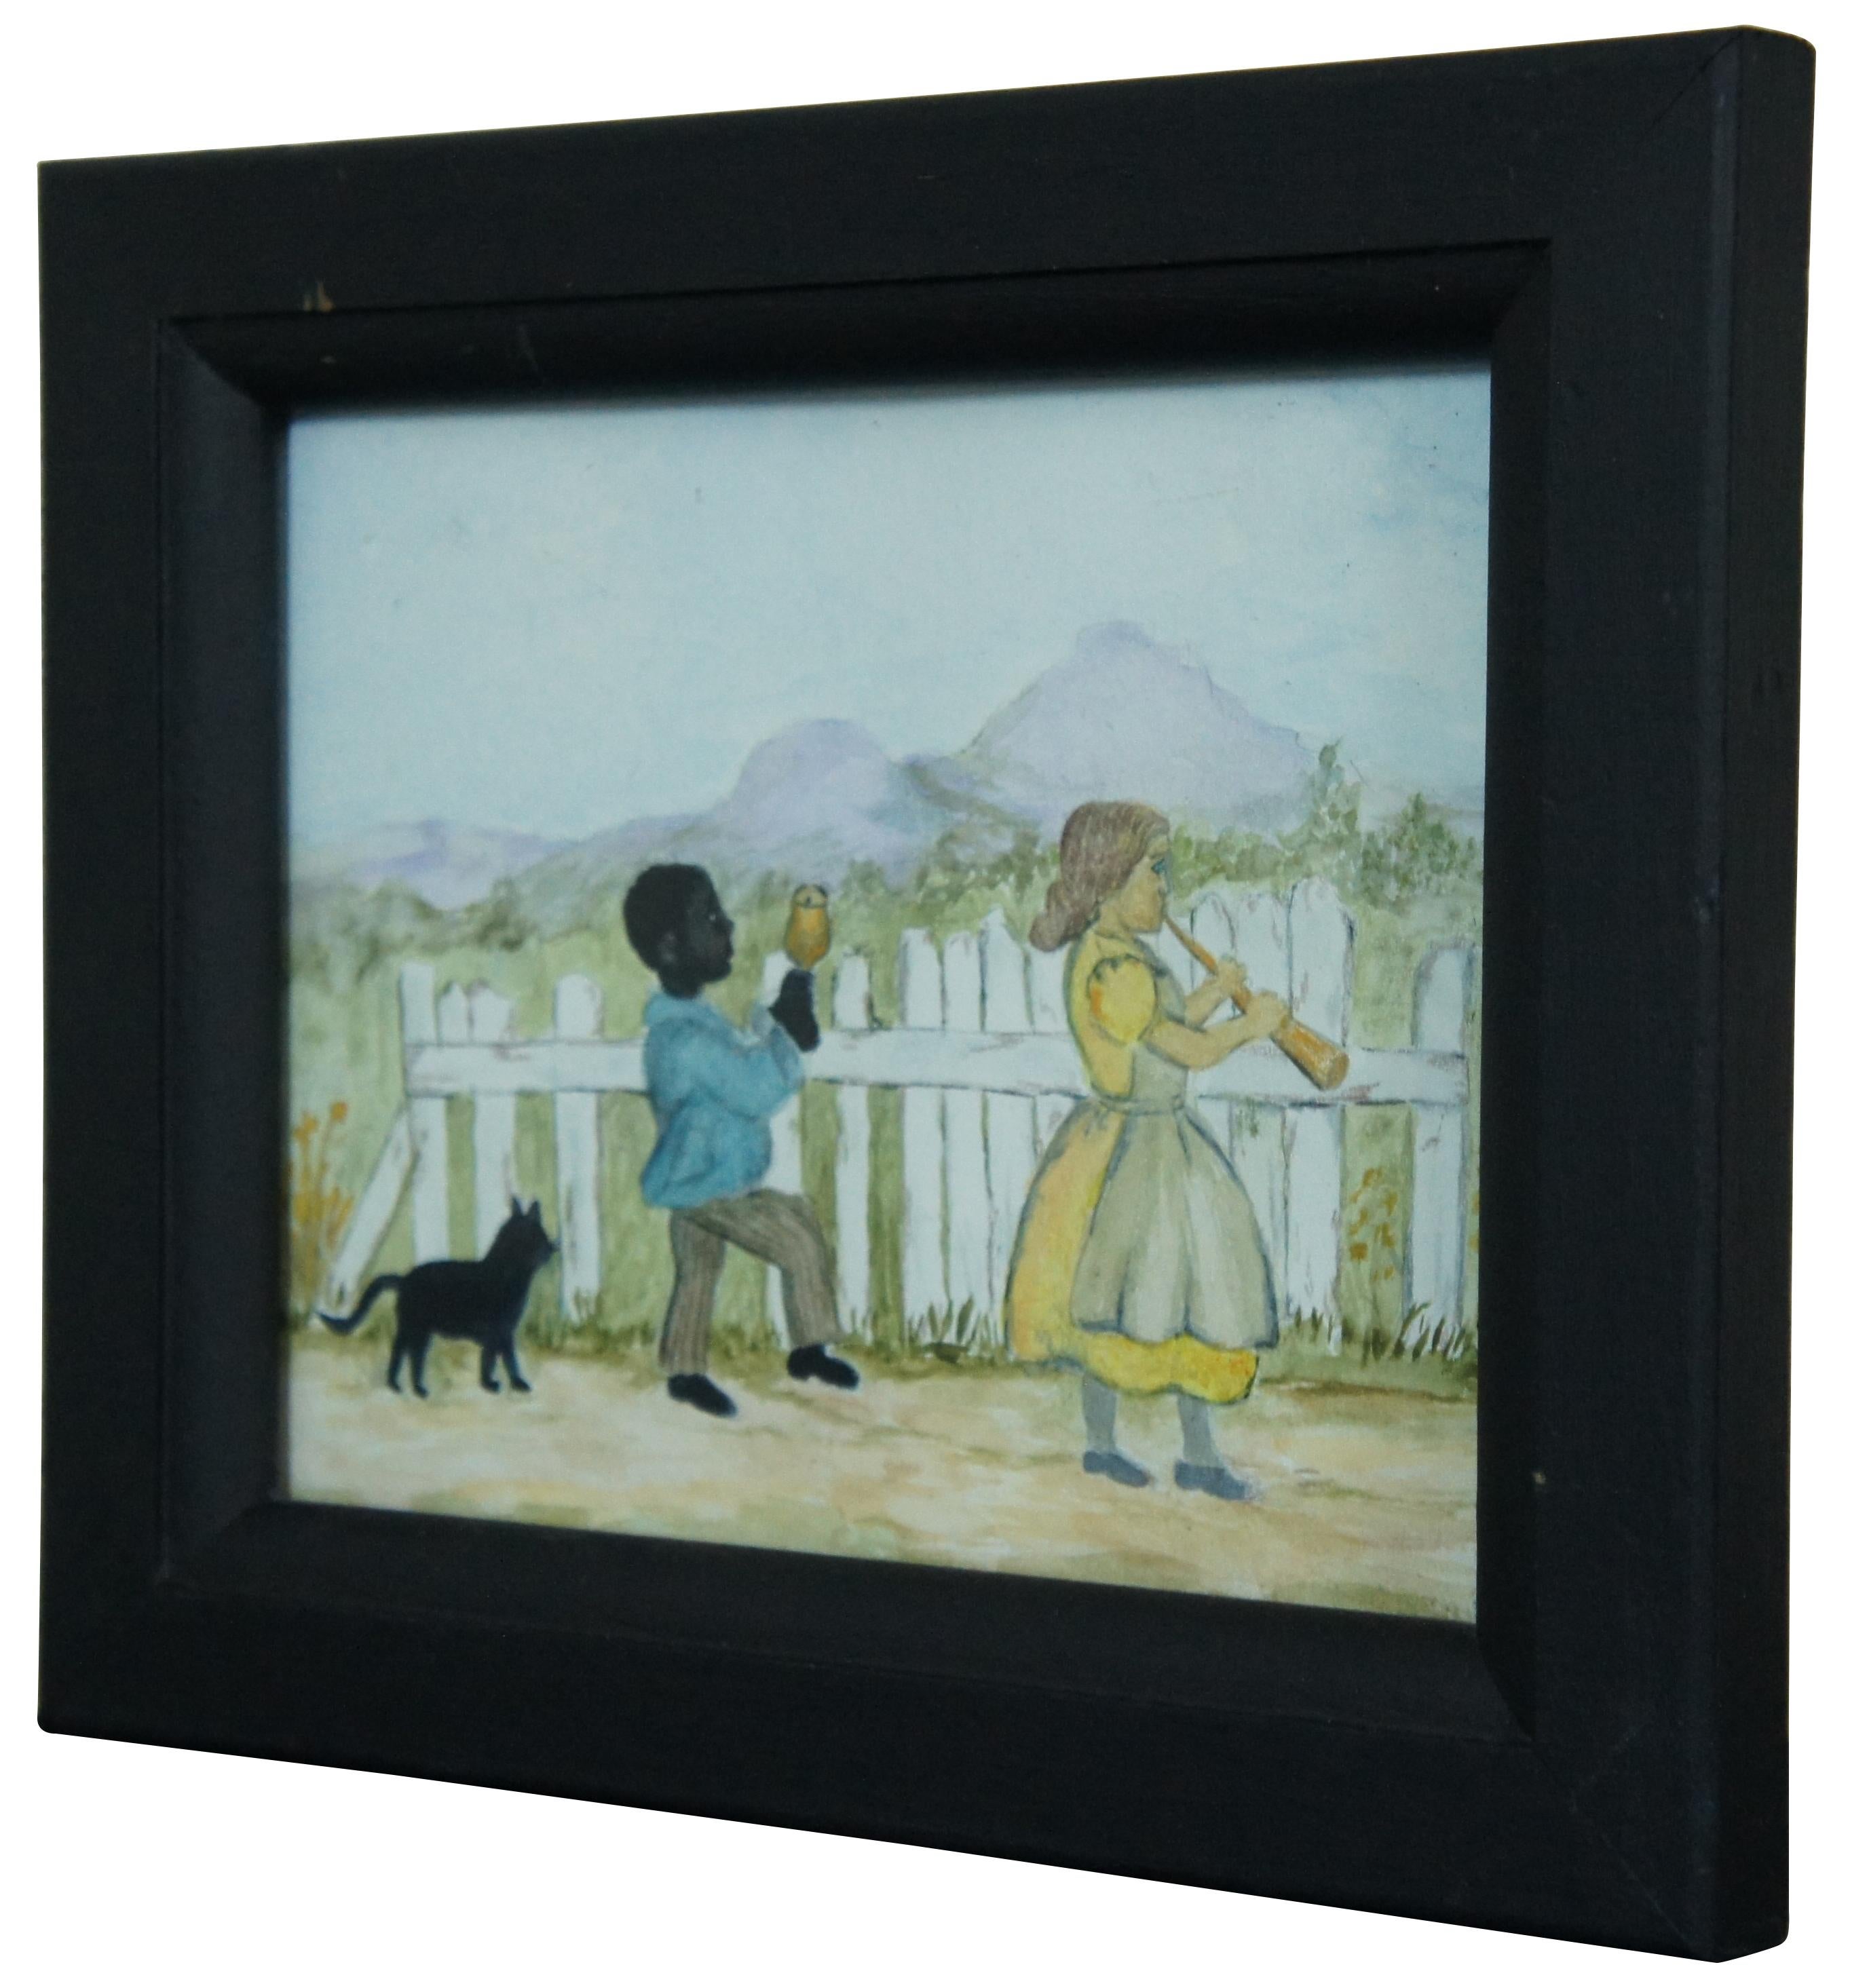 Antique folk art style watercolor painting of a pair of children with instruments and a cat walking down a road lined with a white fence.

Measures: 9.375” x 1” x 8” / Sans Frame - 6.75” x 5.5” (width x depth x height)